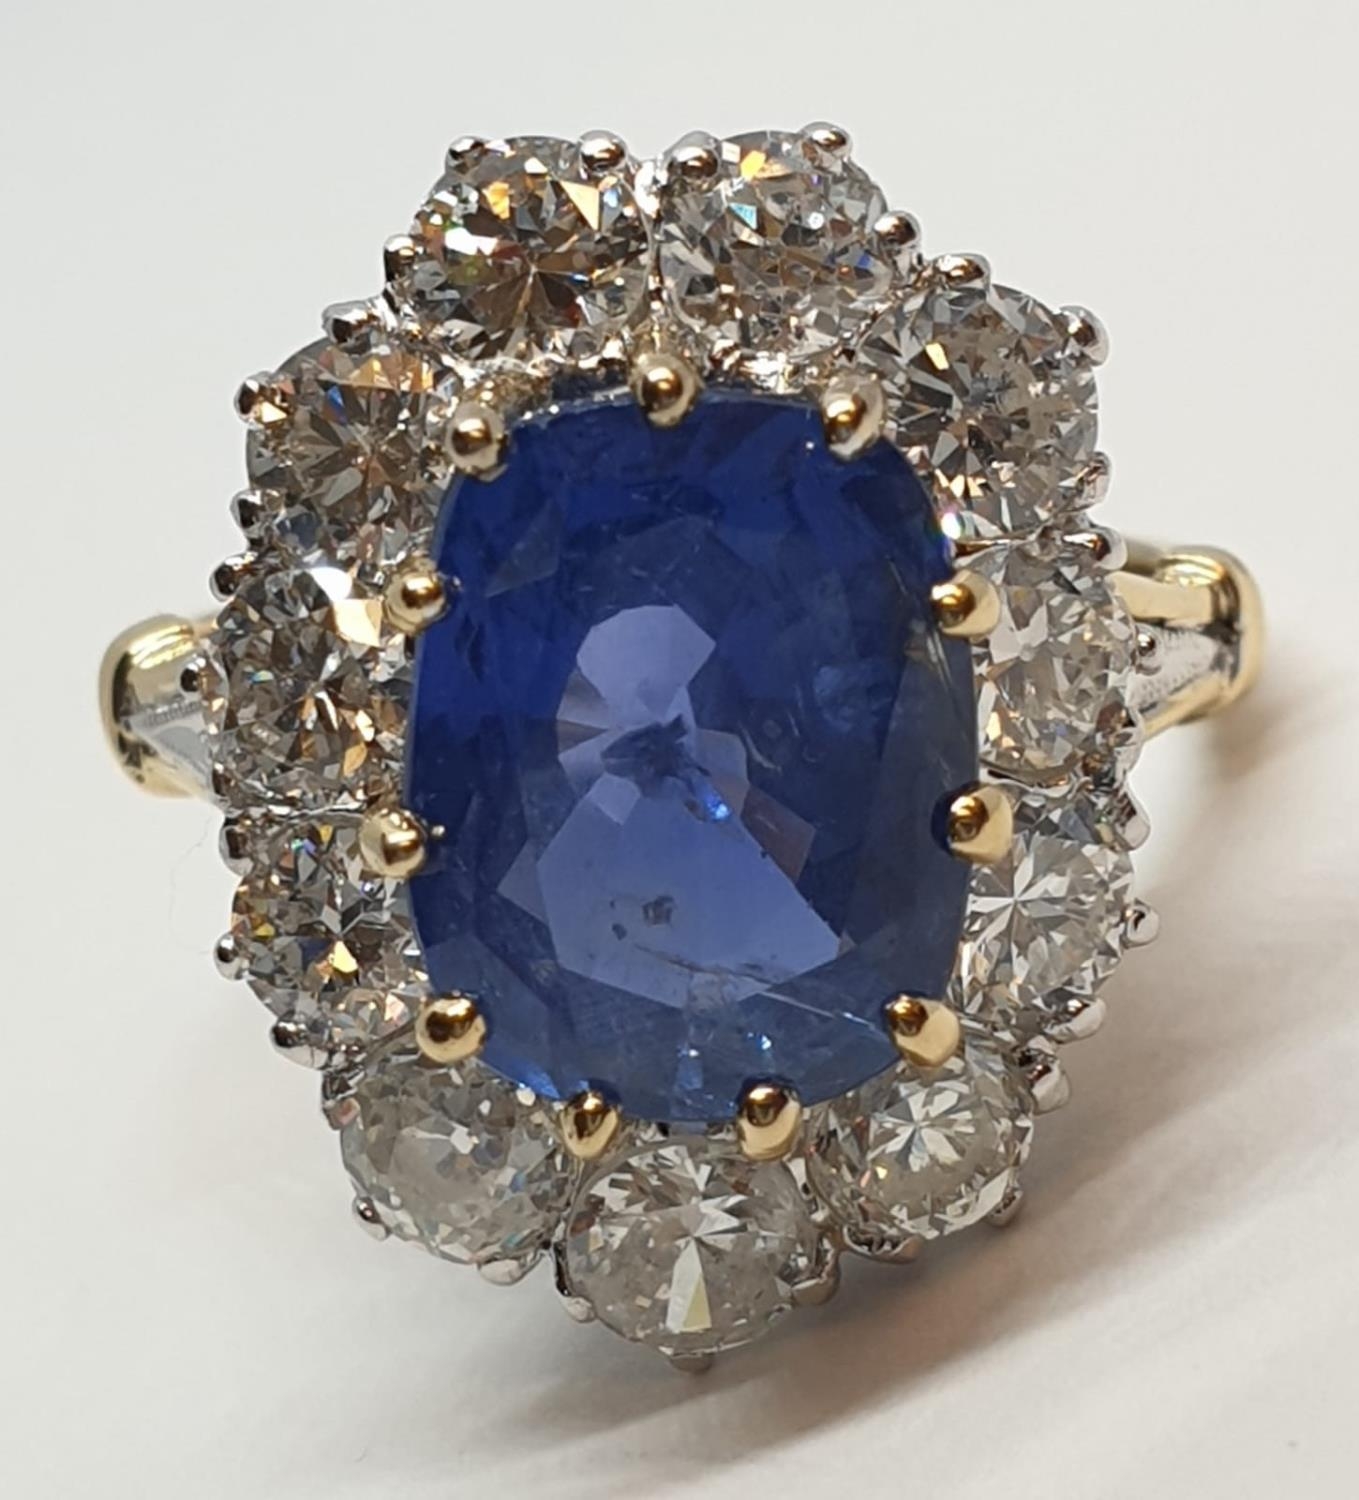 5.75ct sapphire ring set in white and yellow gold with over 3.5ct diamonds surrounding, weight 6.